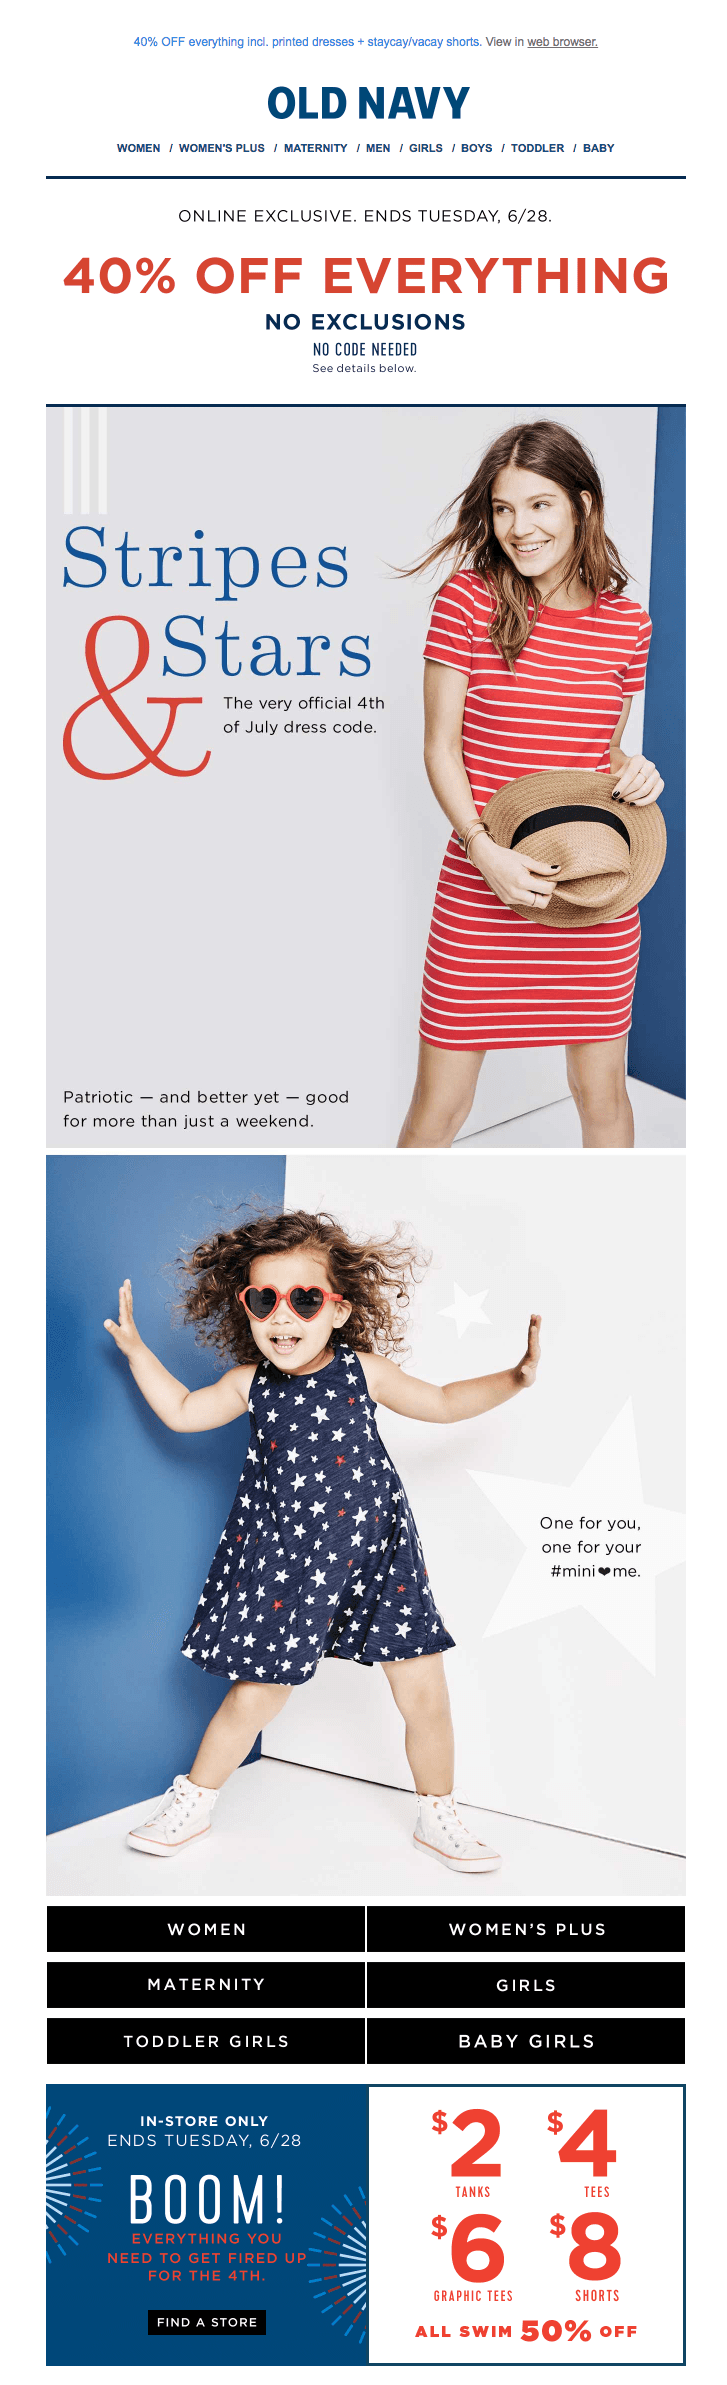 old navy baby 4th of july